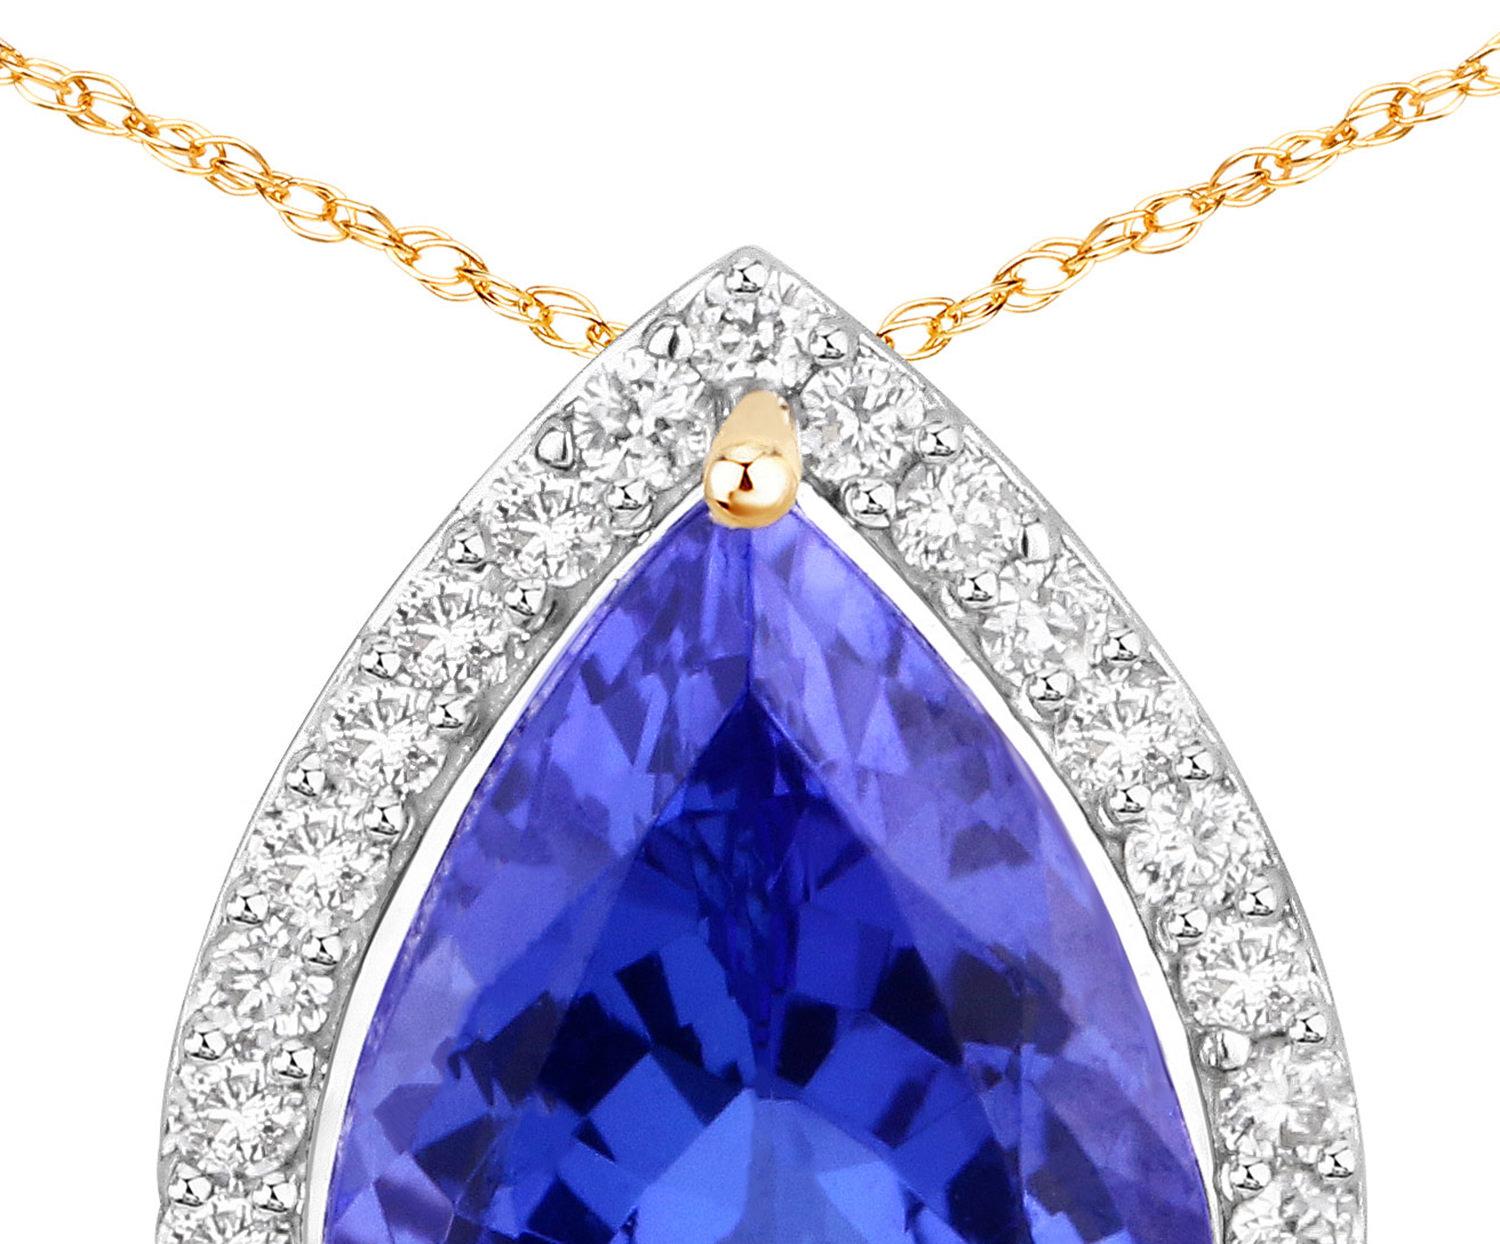 It comes with the appraisal by GIA GG/AJP
All Gemstones are Natural
Pear Cut Tanzanite = 2.88 Carat
28 Round Diamonds = 0.22 Carats
Metal: 14K Gold